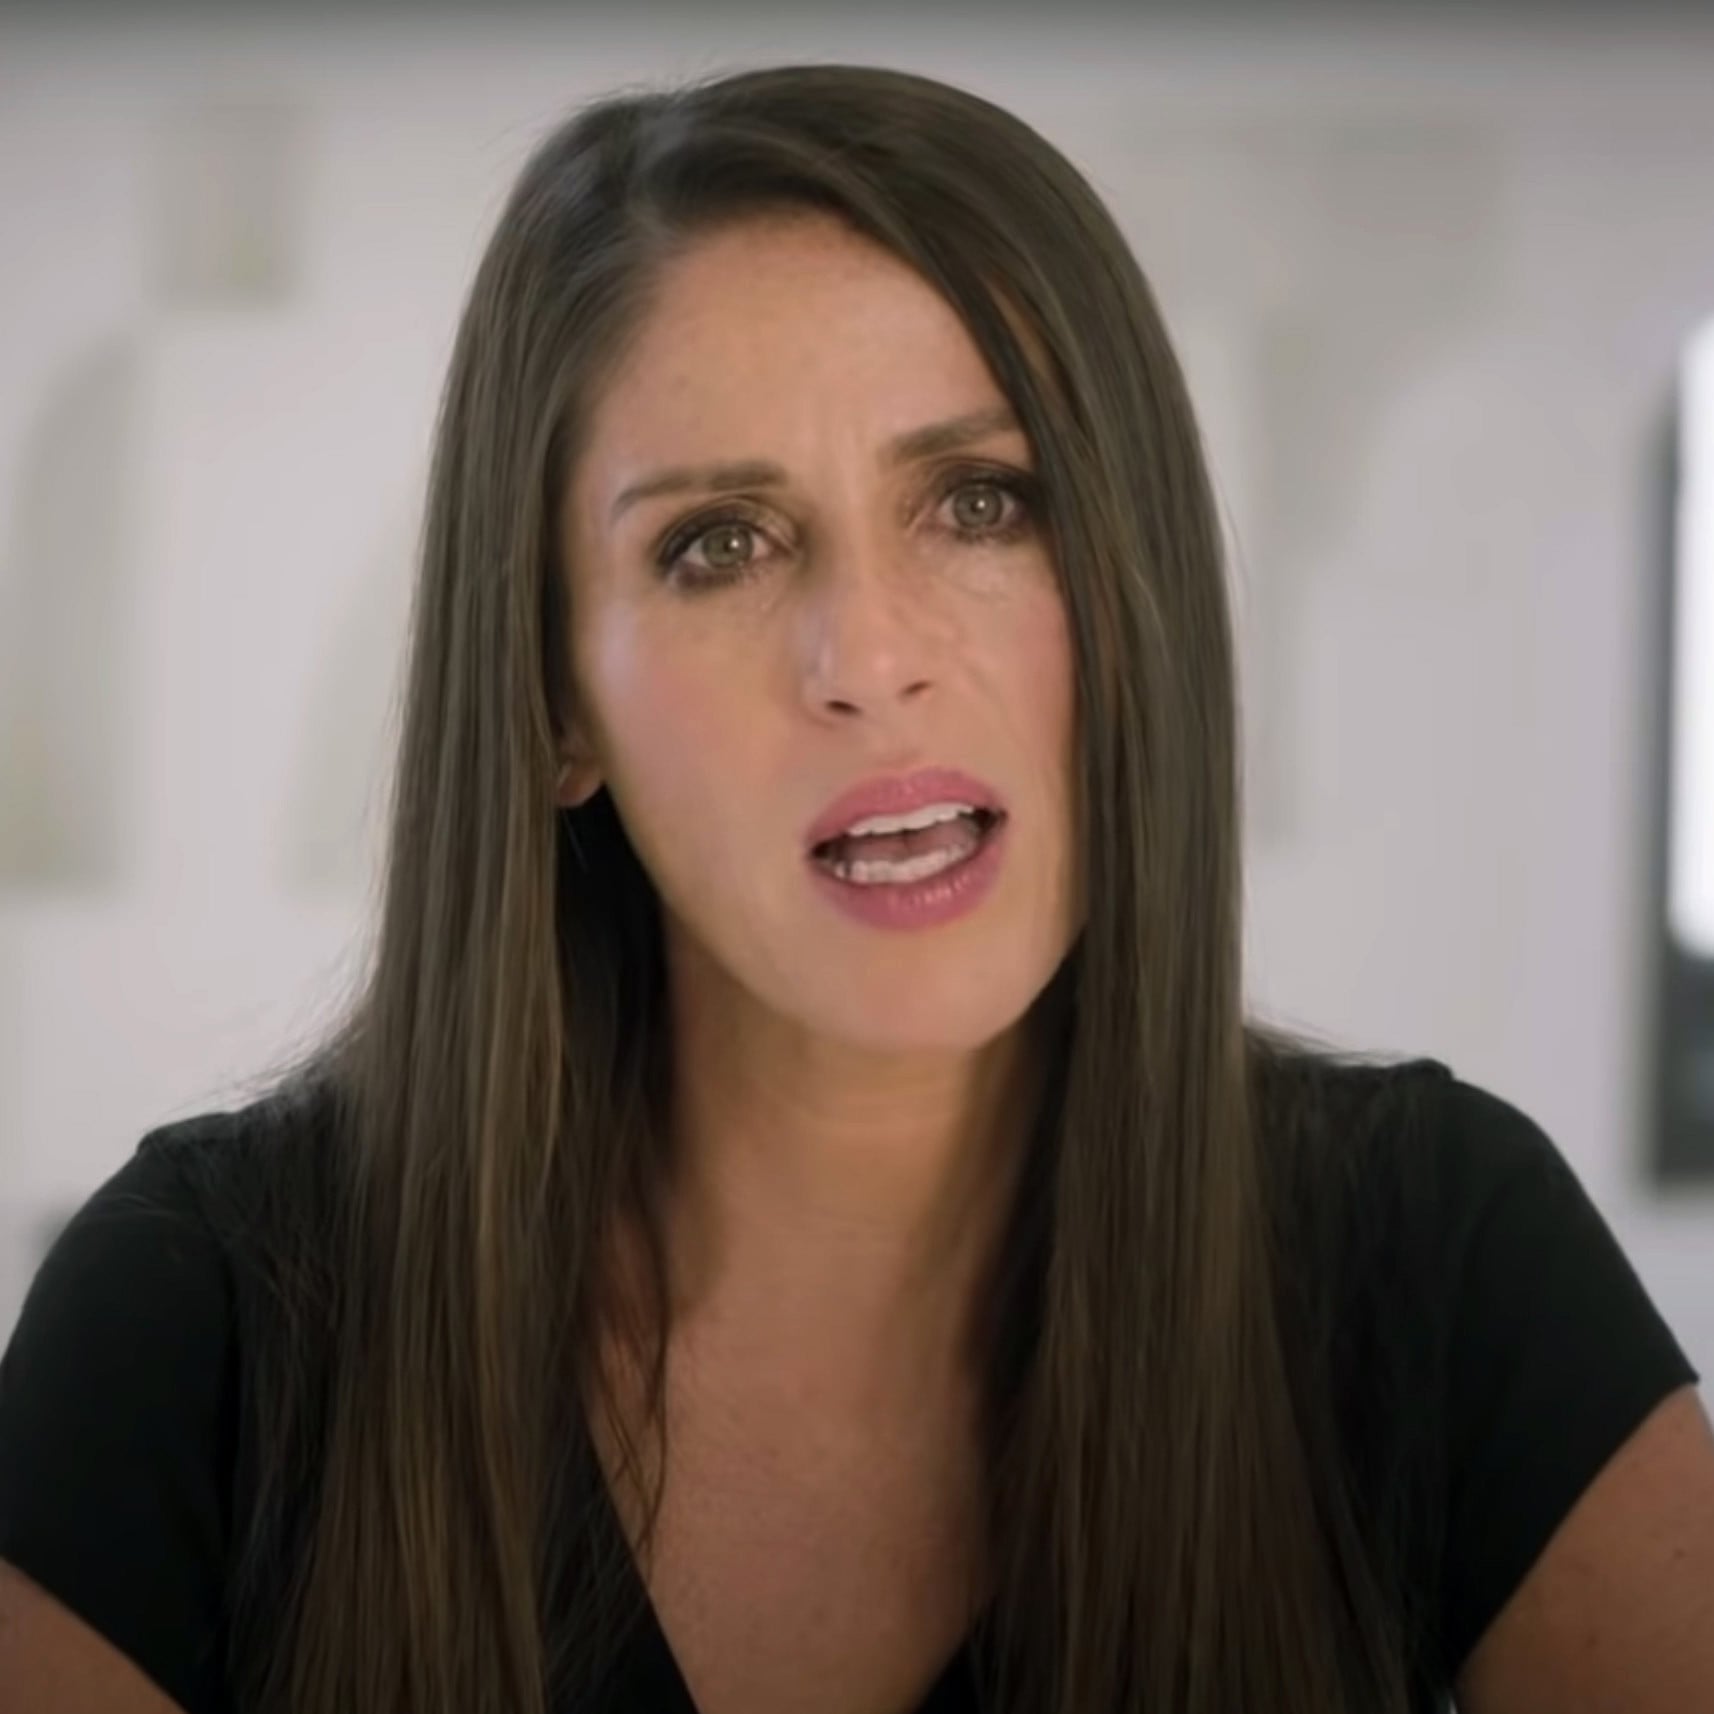 Punky Brewster's Soleil Moon Frye says she had 'first consensual sexual  experience' with Charlie Sheen when she was 18